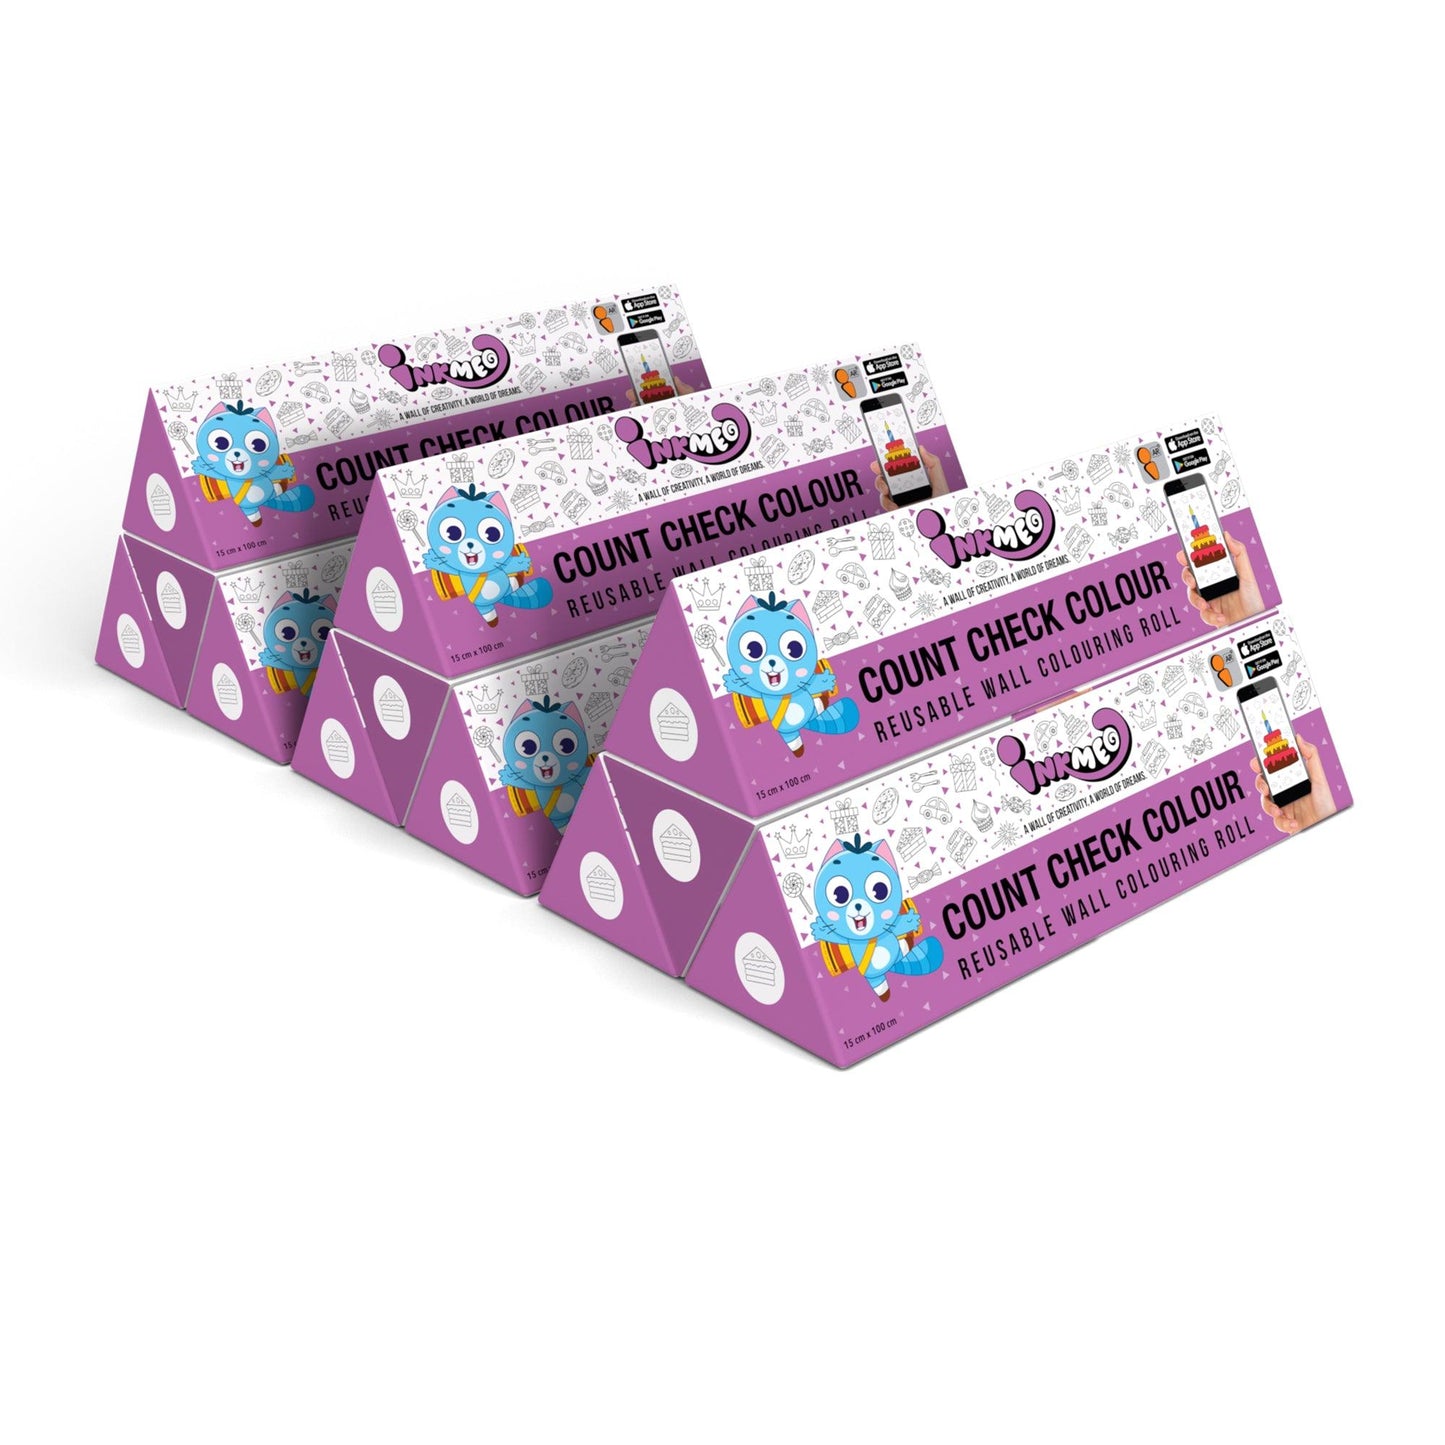 Count Check Colour Colouring Roll (6 inch)